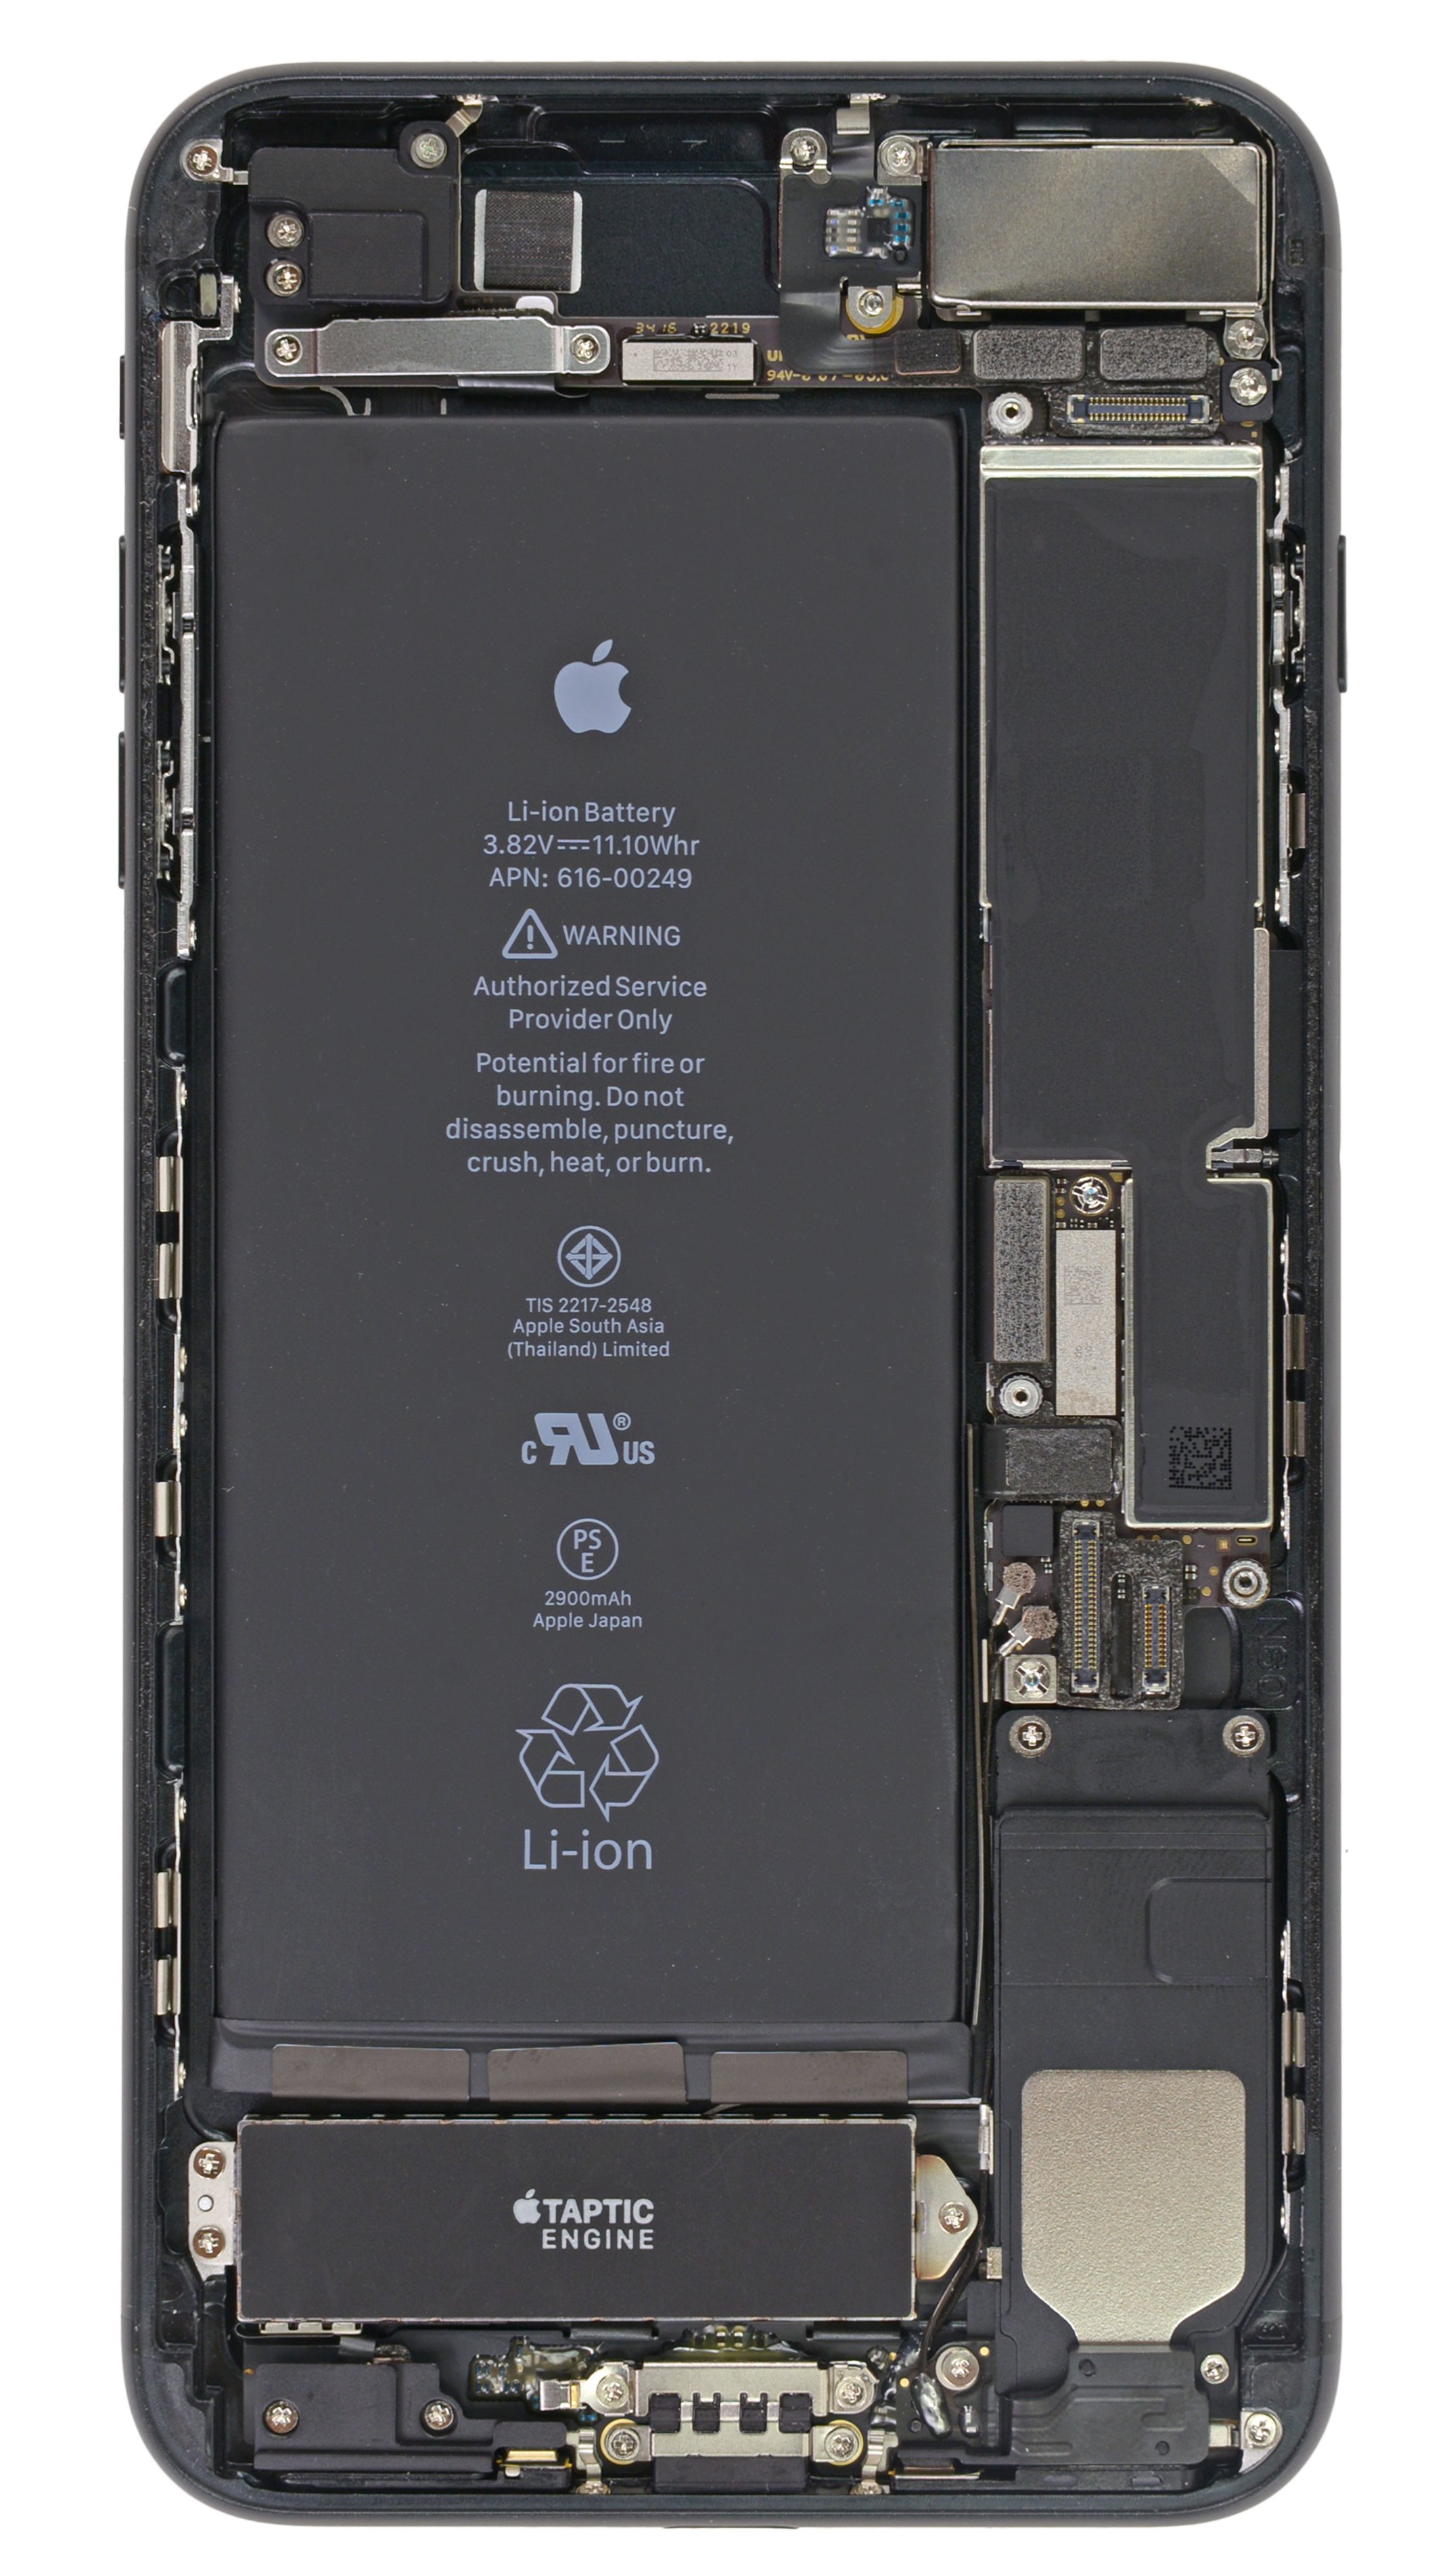 iphone 6 internals wallpaper,technology,electronic device,laptop accessory